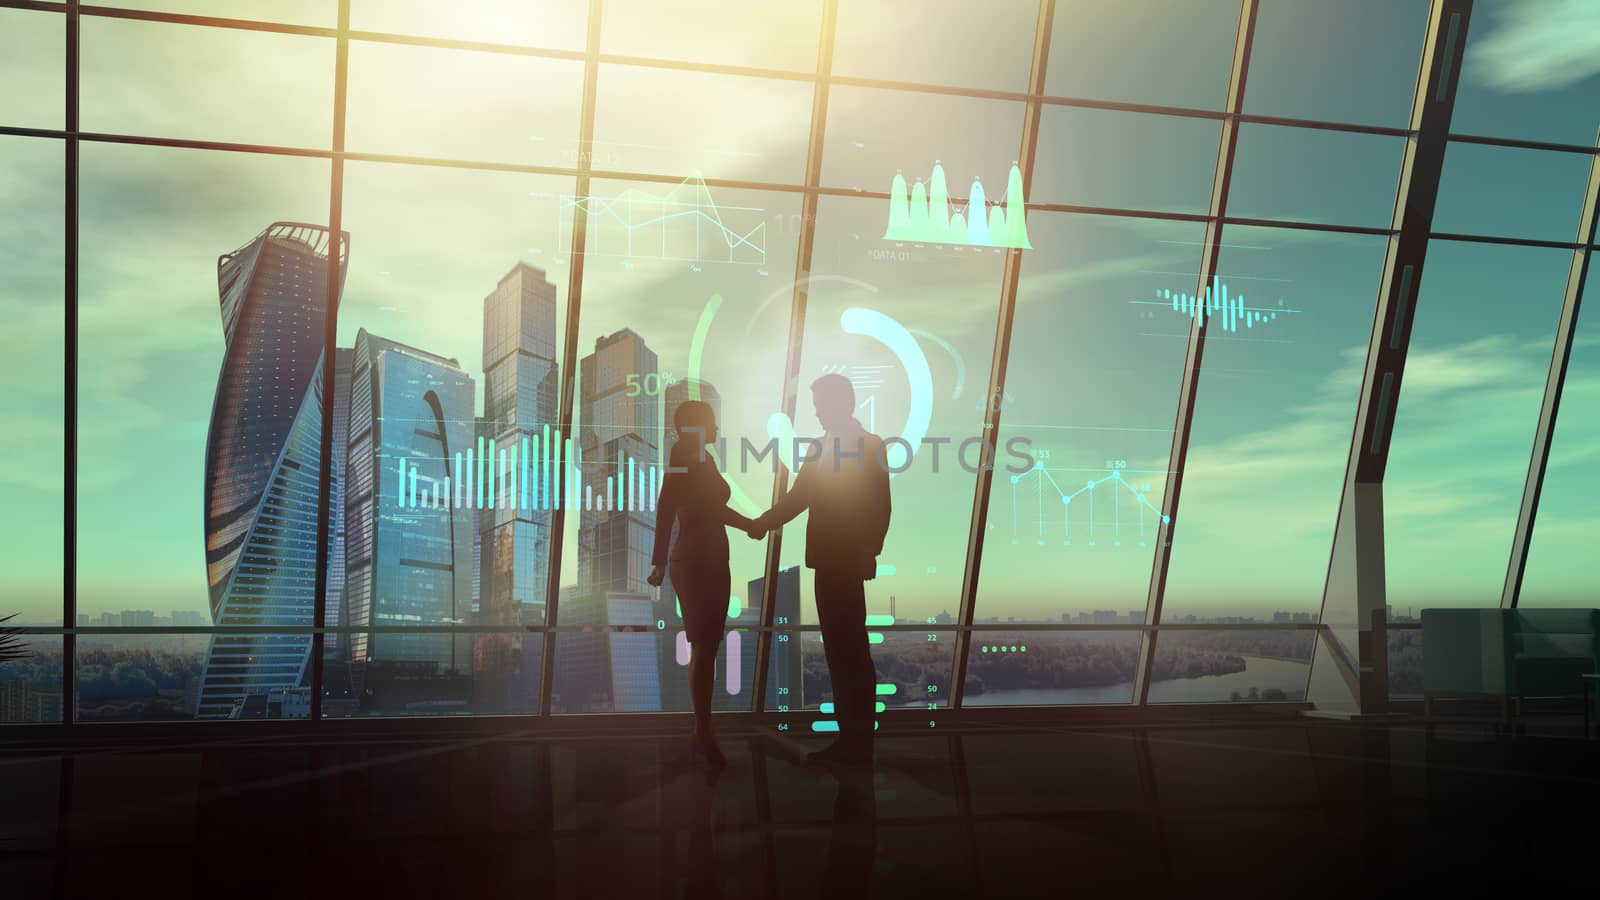 Figures of business people in a handshake against the background of a window overlooking skyscrapers and a virtual infographic.